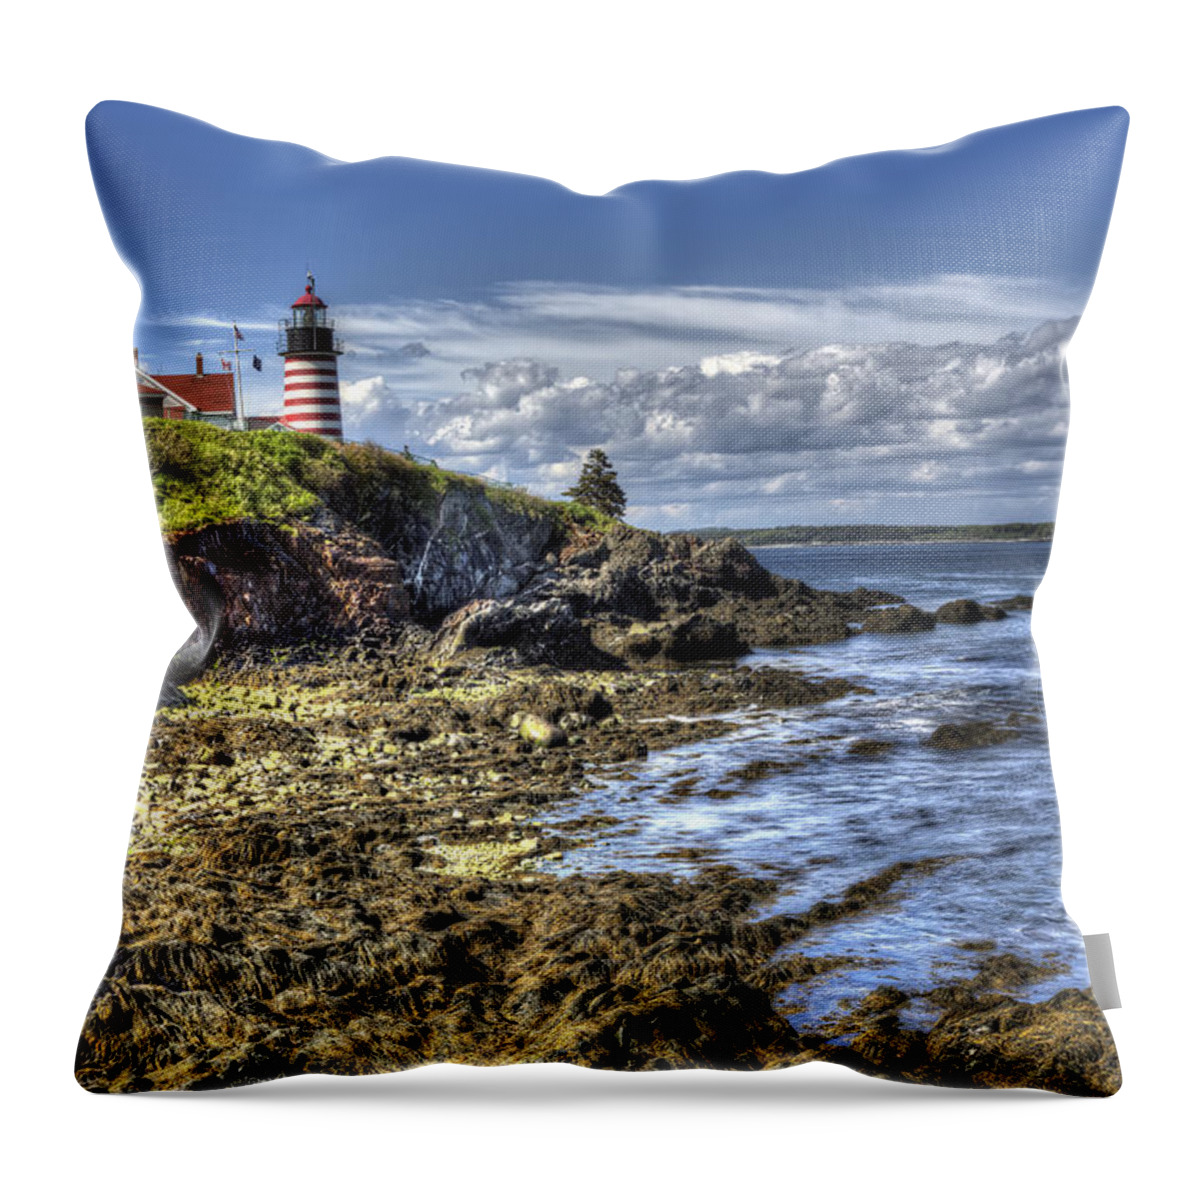 Lighthouse Throw Pillow featuring the photograph West Quoddy Lubec Maine Lighthouse by Shawn Everhart